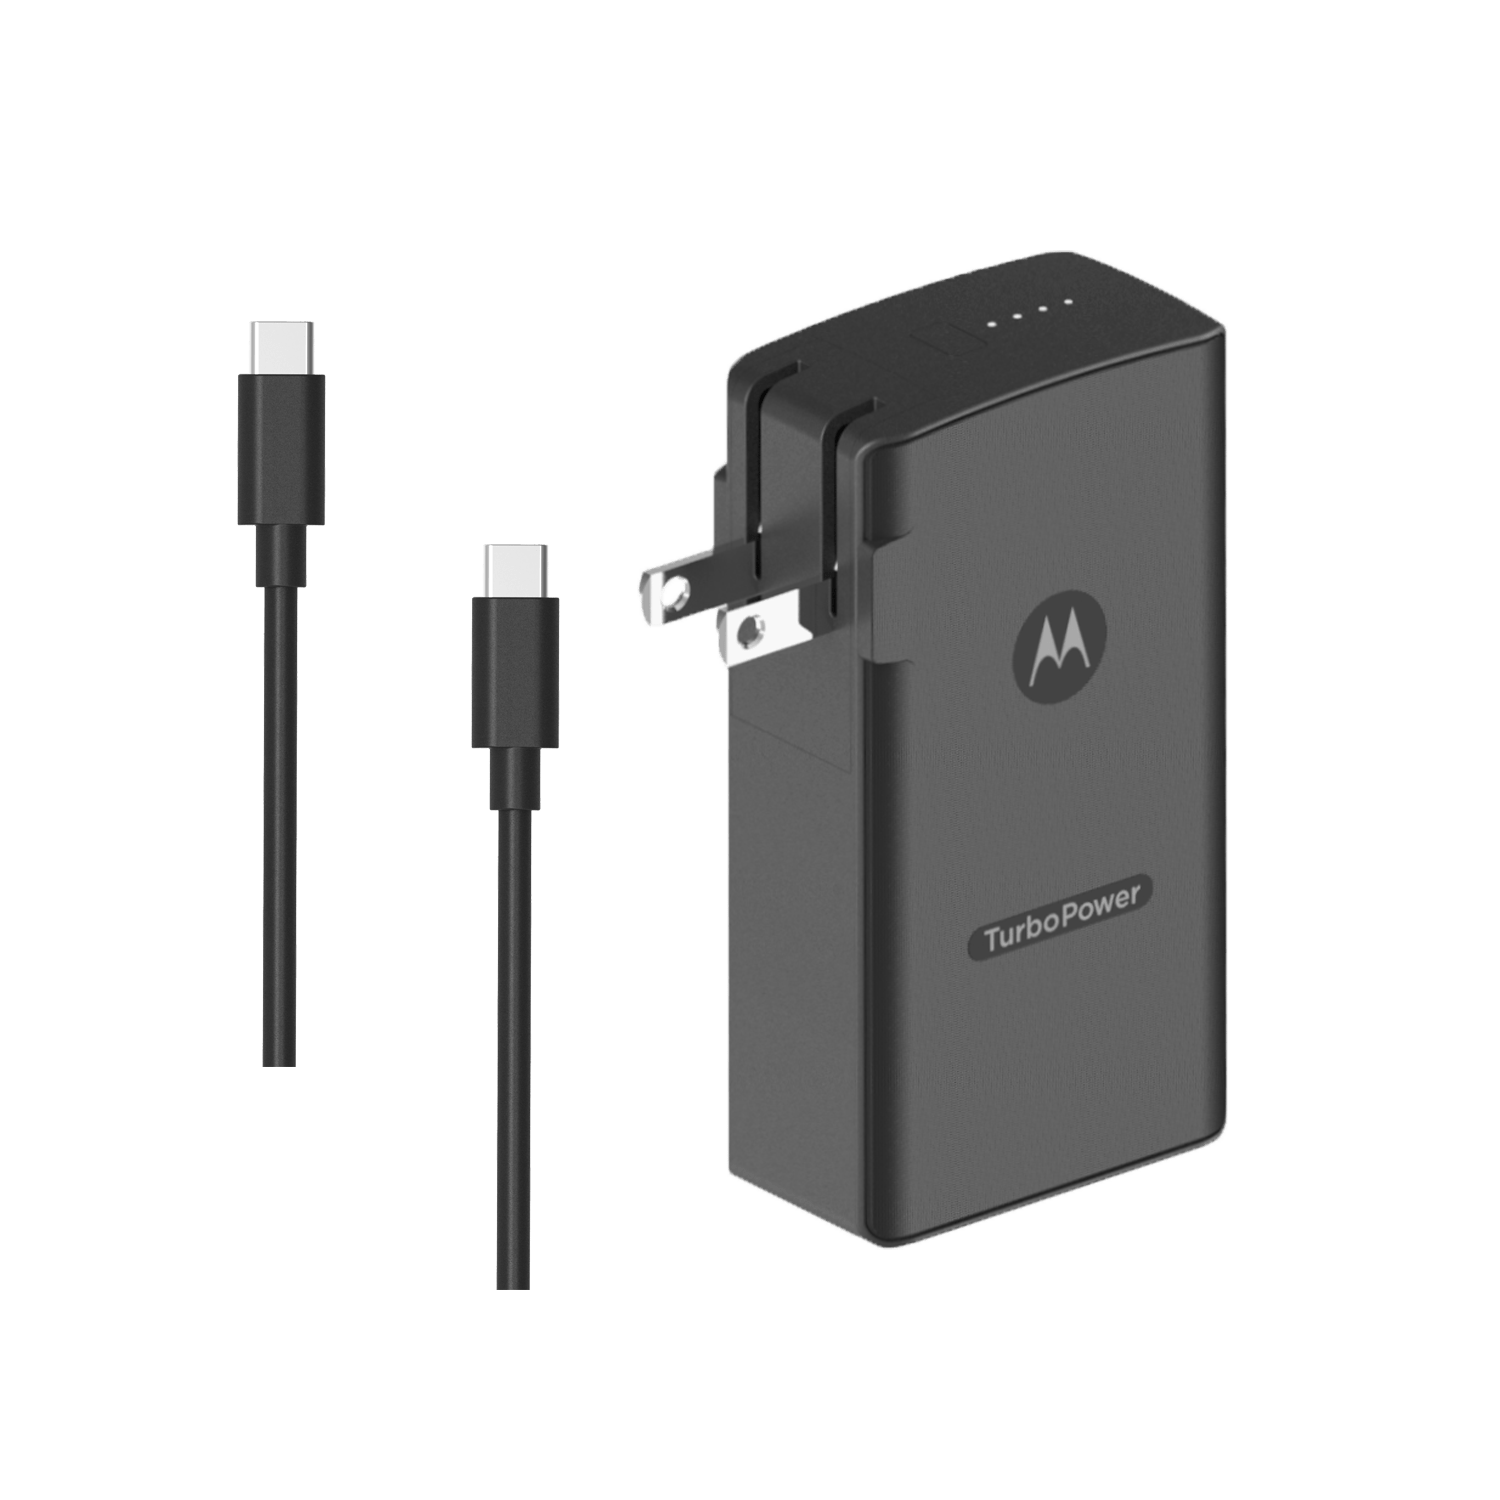 Motorola TurboPower Traveler 5000mAh Portable Charger with Folding AC Blades and USB-C Cable